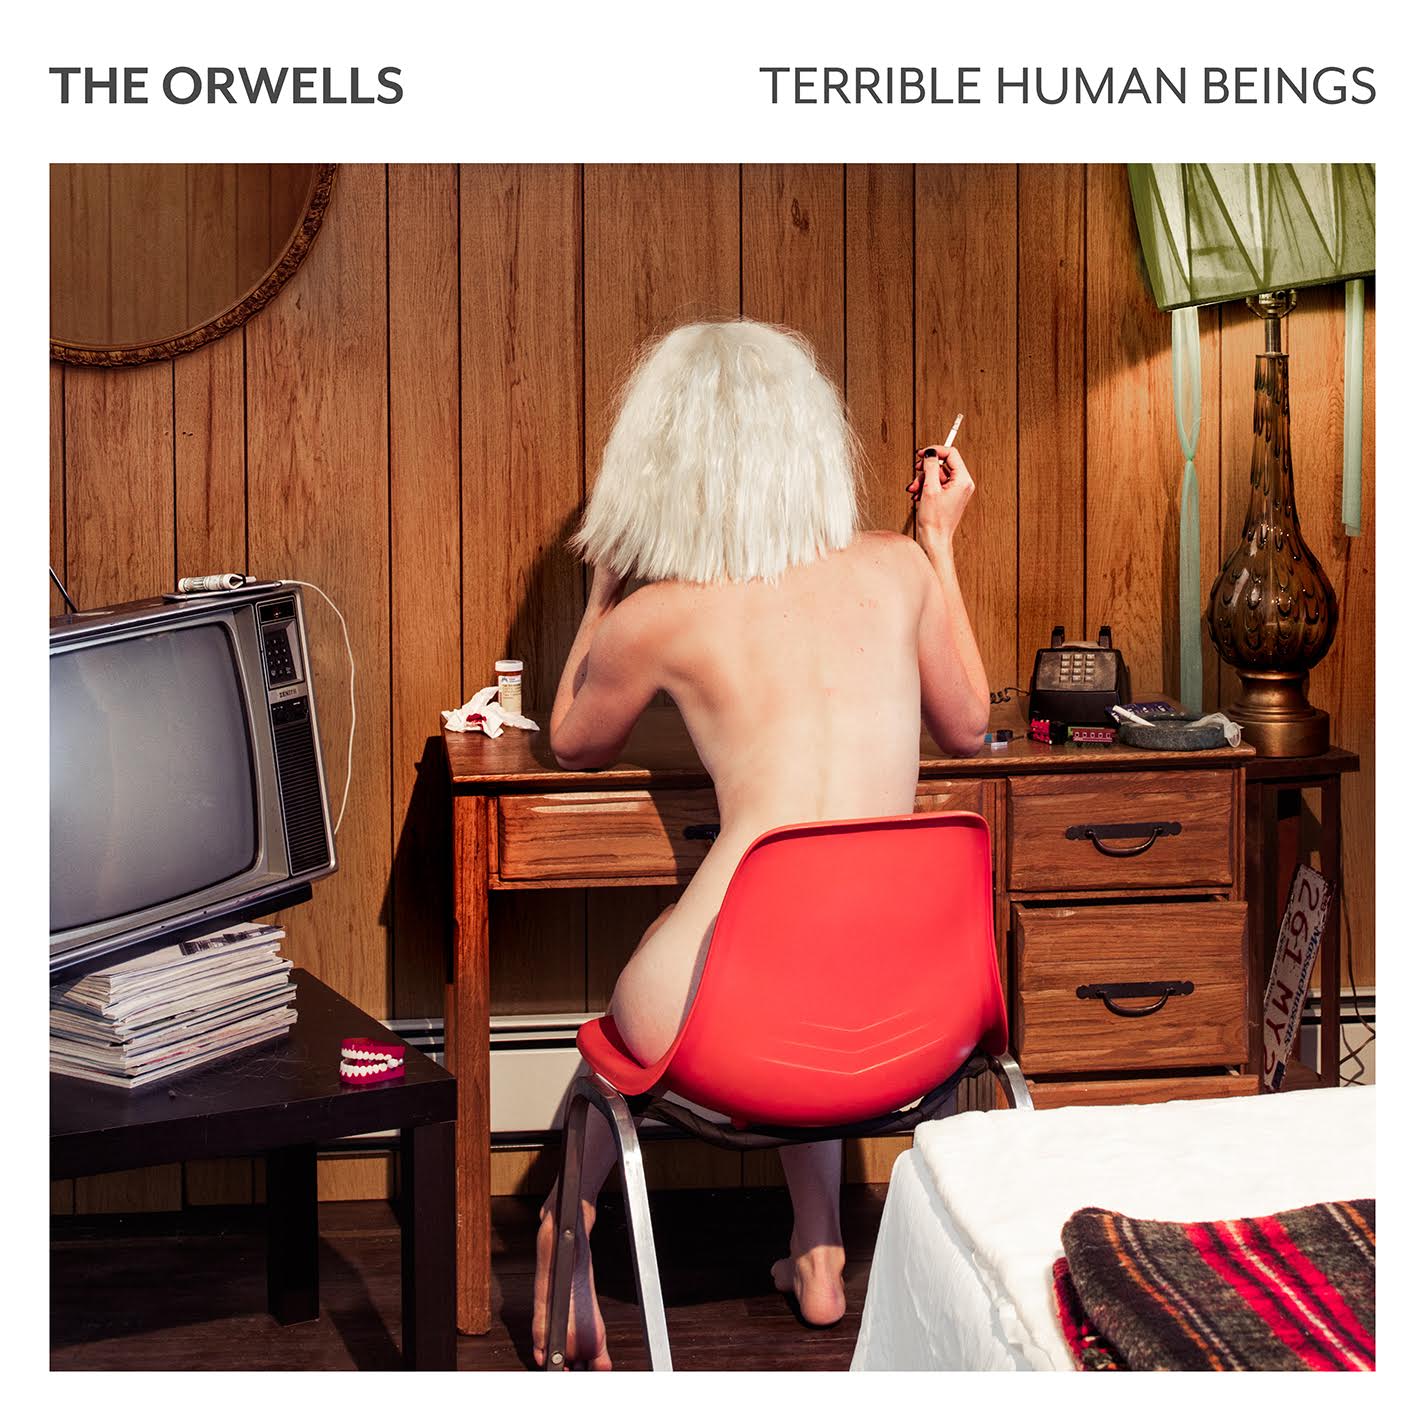 The Orwells Are Moving Past Growing Pains on <em>Terrible Human Beings</em>” title=”unnamed-1″ data-original-id=”213719″ data-adjusted-id=”213719″ class=”sm_size_full_width sm_alignment_center ” /></p>
<p>The 13-track collection finds the band trying out some new territory, focusing a little less on the danceable, buoyant guitar rhythms of their first two albums to make room for “weird drum-loop experimentations, a lot of backward stuff, and different vocal techniques,” according to O’Keefe.</p>
<p>This time around, the Orwells are fancying themselves craftsmen. Yes, they’re still in their early twenties, but they’re more interested in moving forward than simply getting loused on the same tales of knocking back beers with friends and spending wild nights with strangers.</p>
<p>“I have a slightly different view in the short span of a year or two,” Cuomo says. “It pushes [you] more as an artist … You can’t get away with as much—and I don’t think we want to, either.”</p>
</p><p>To see our running list of the top 100 greatest rock stars of all time, <a href=